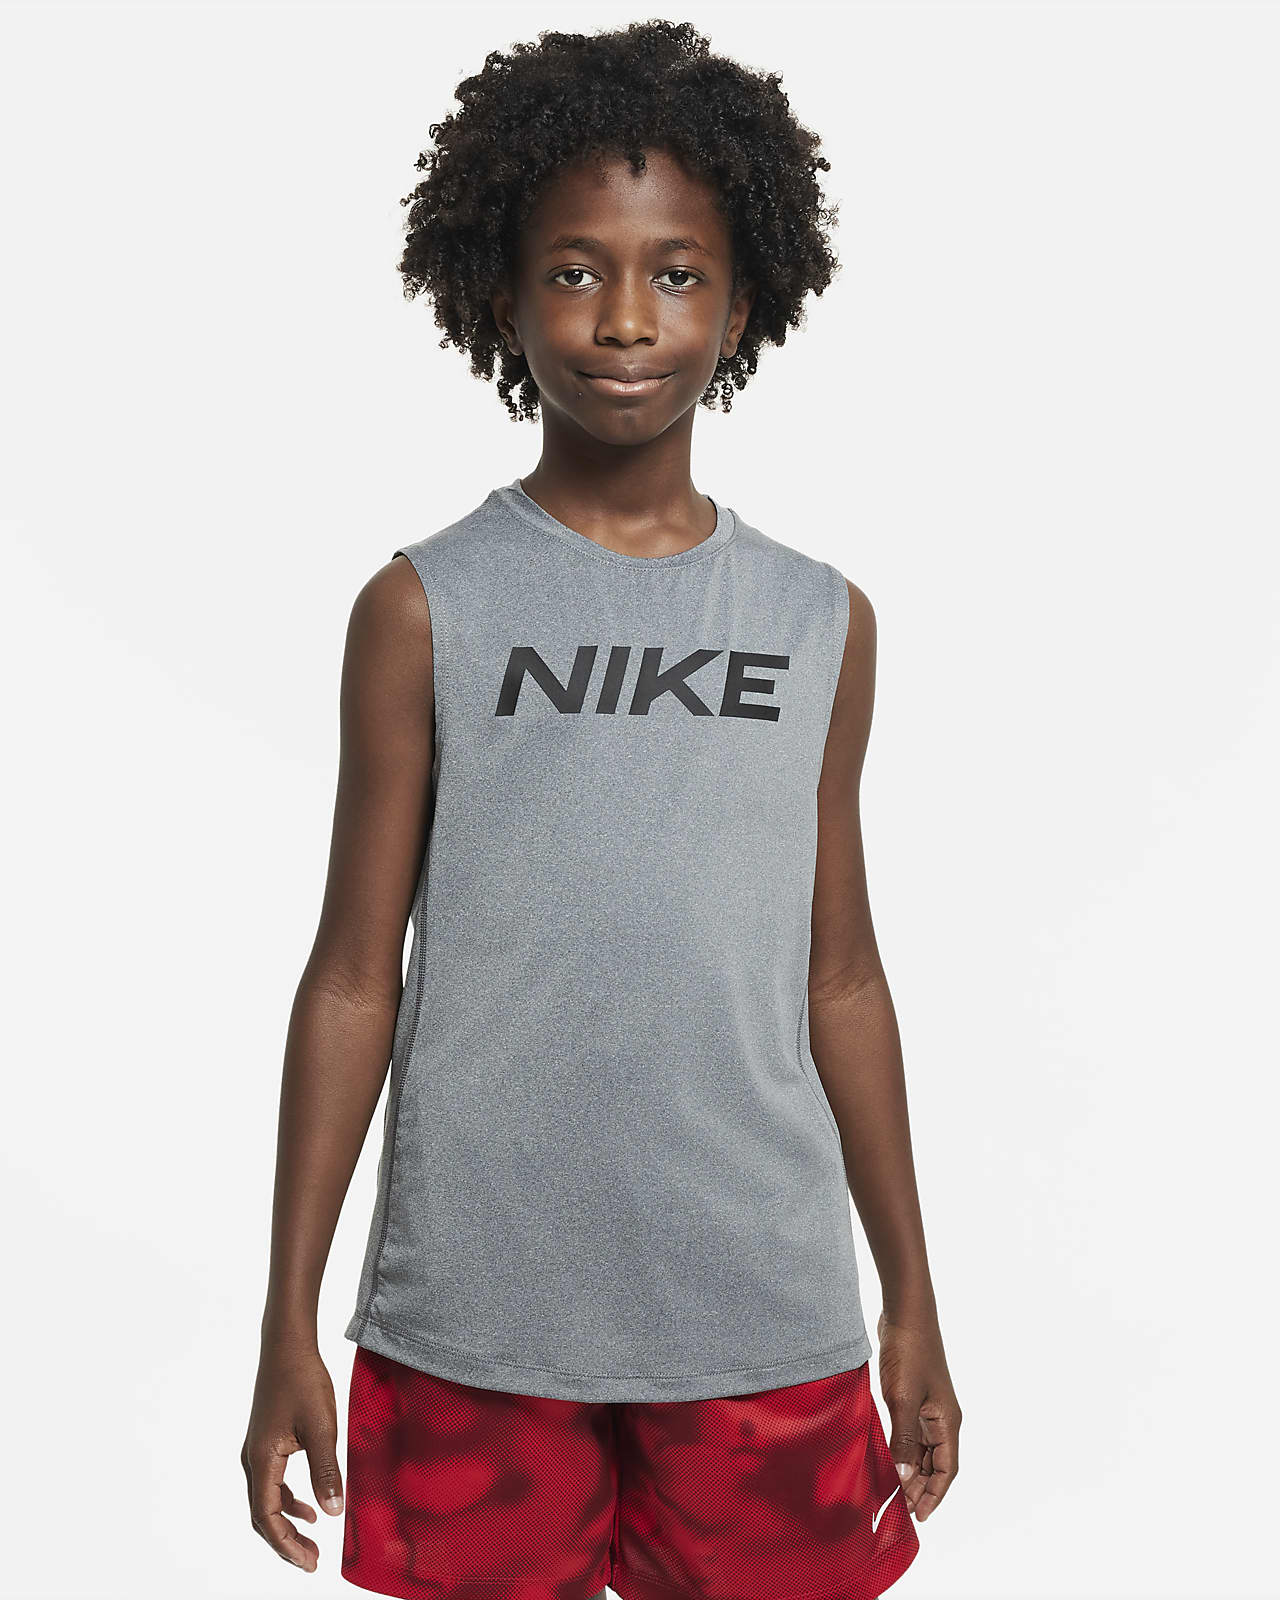 Nike Pro Sleeveless Fitted HBR Top - Boys' - Kids